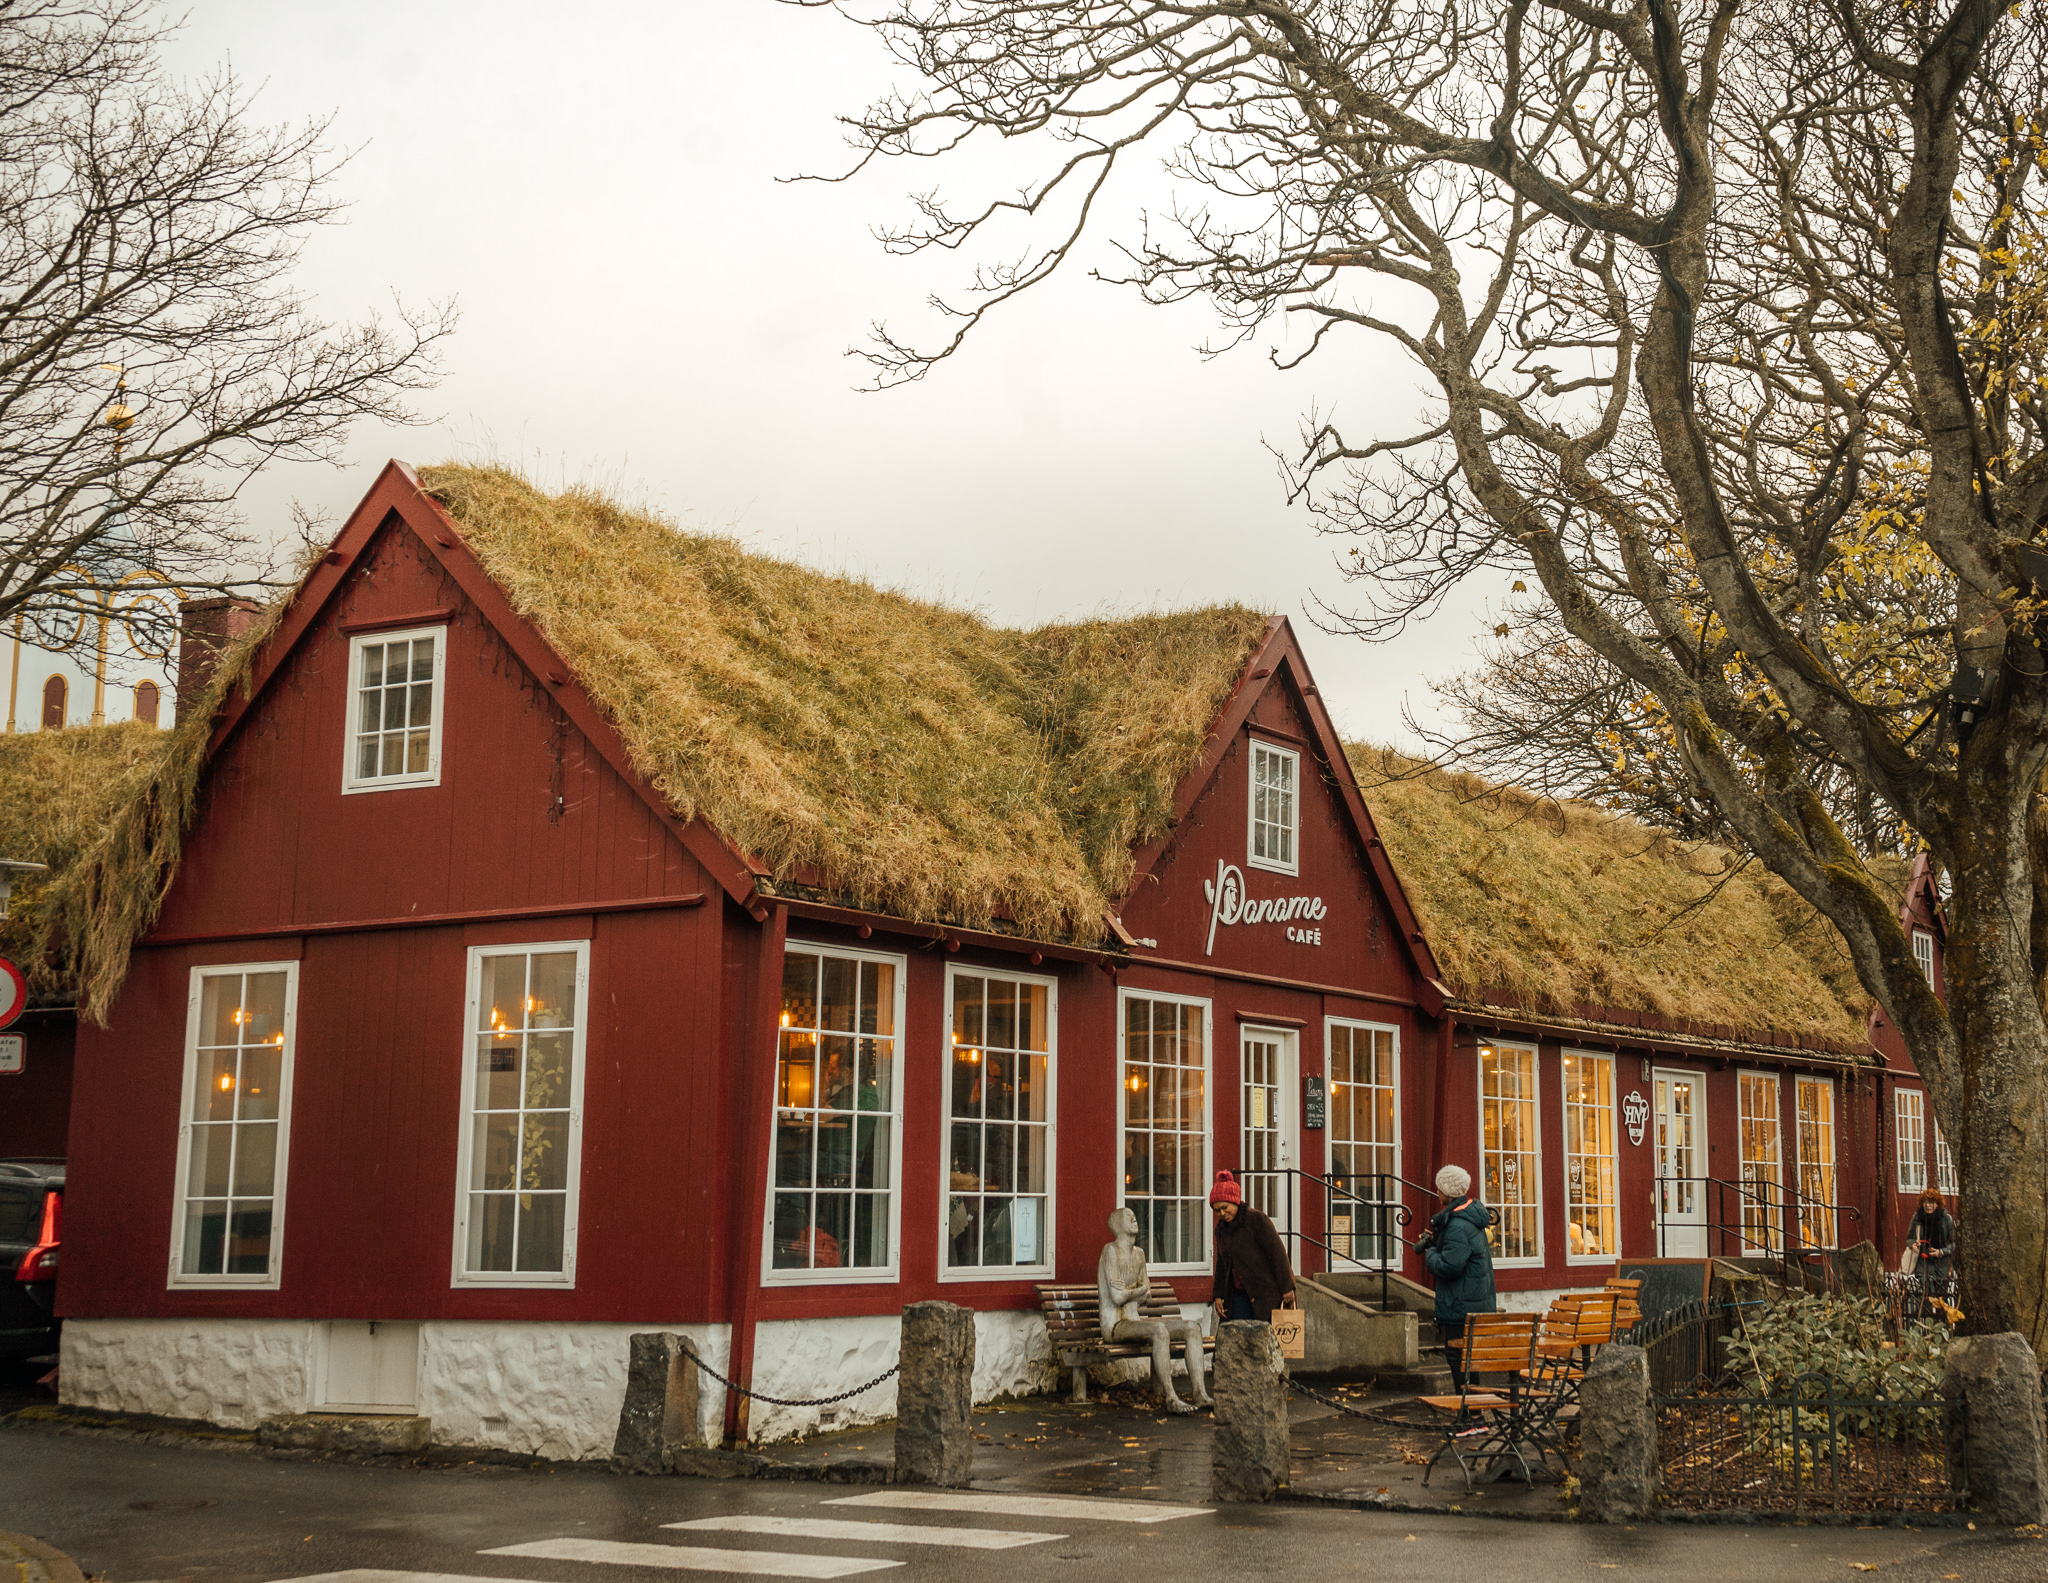 paname cafe in torshavn built in traditional faorese style with grass on the roof